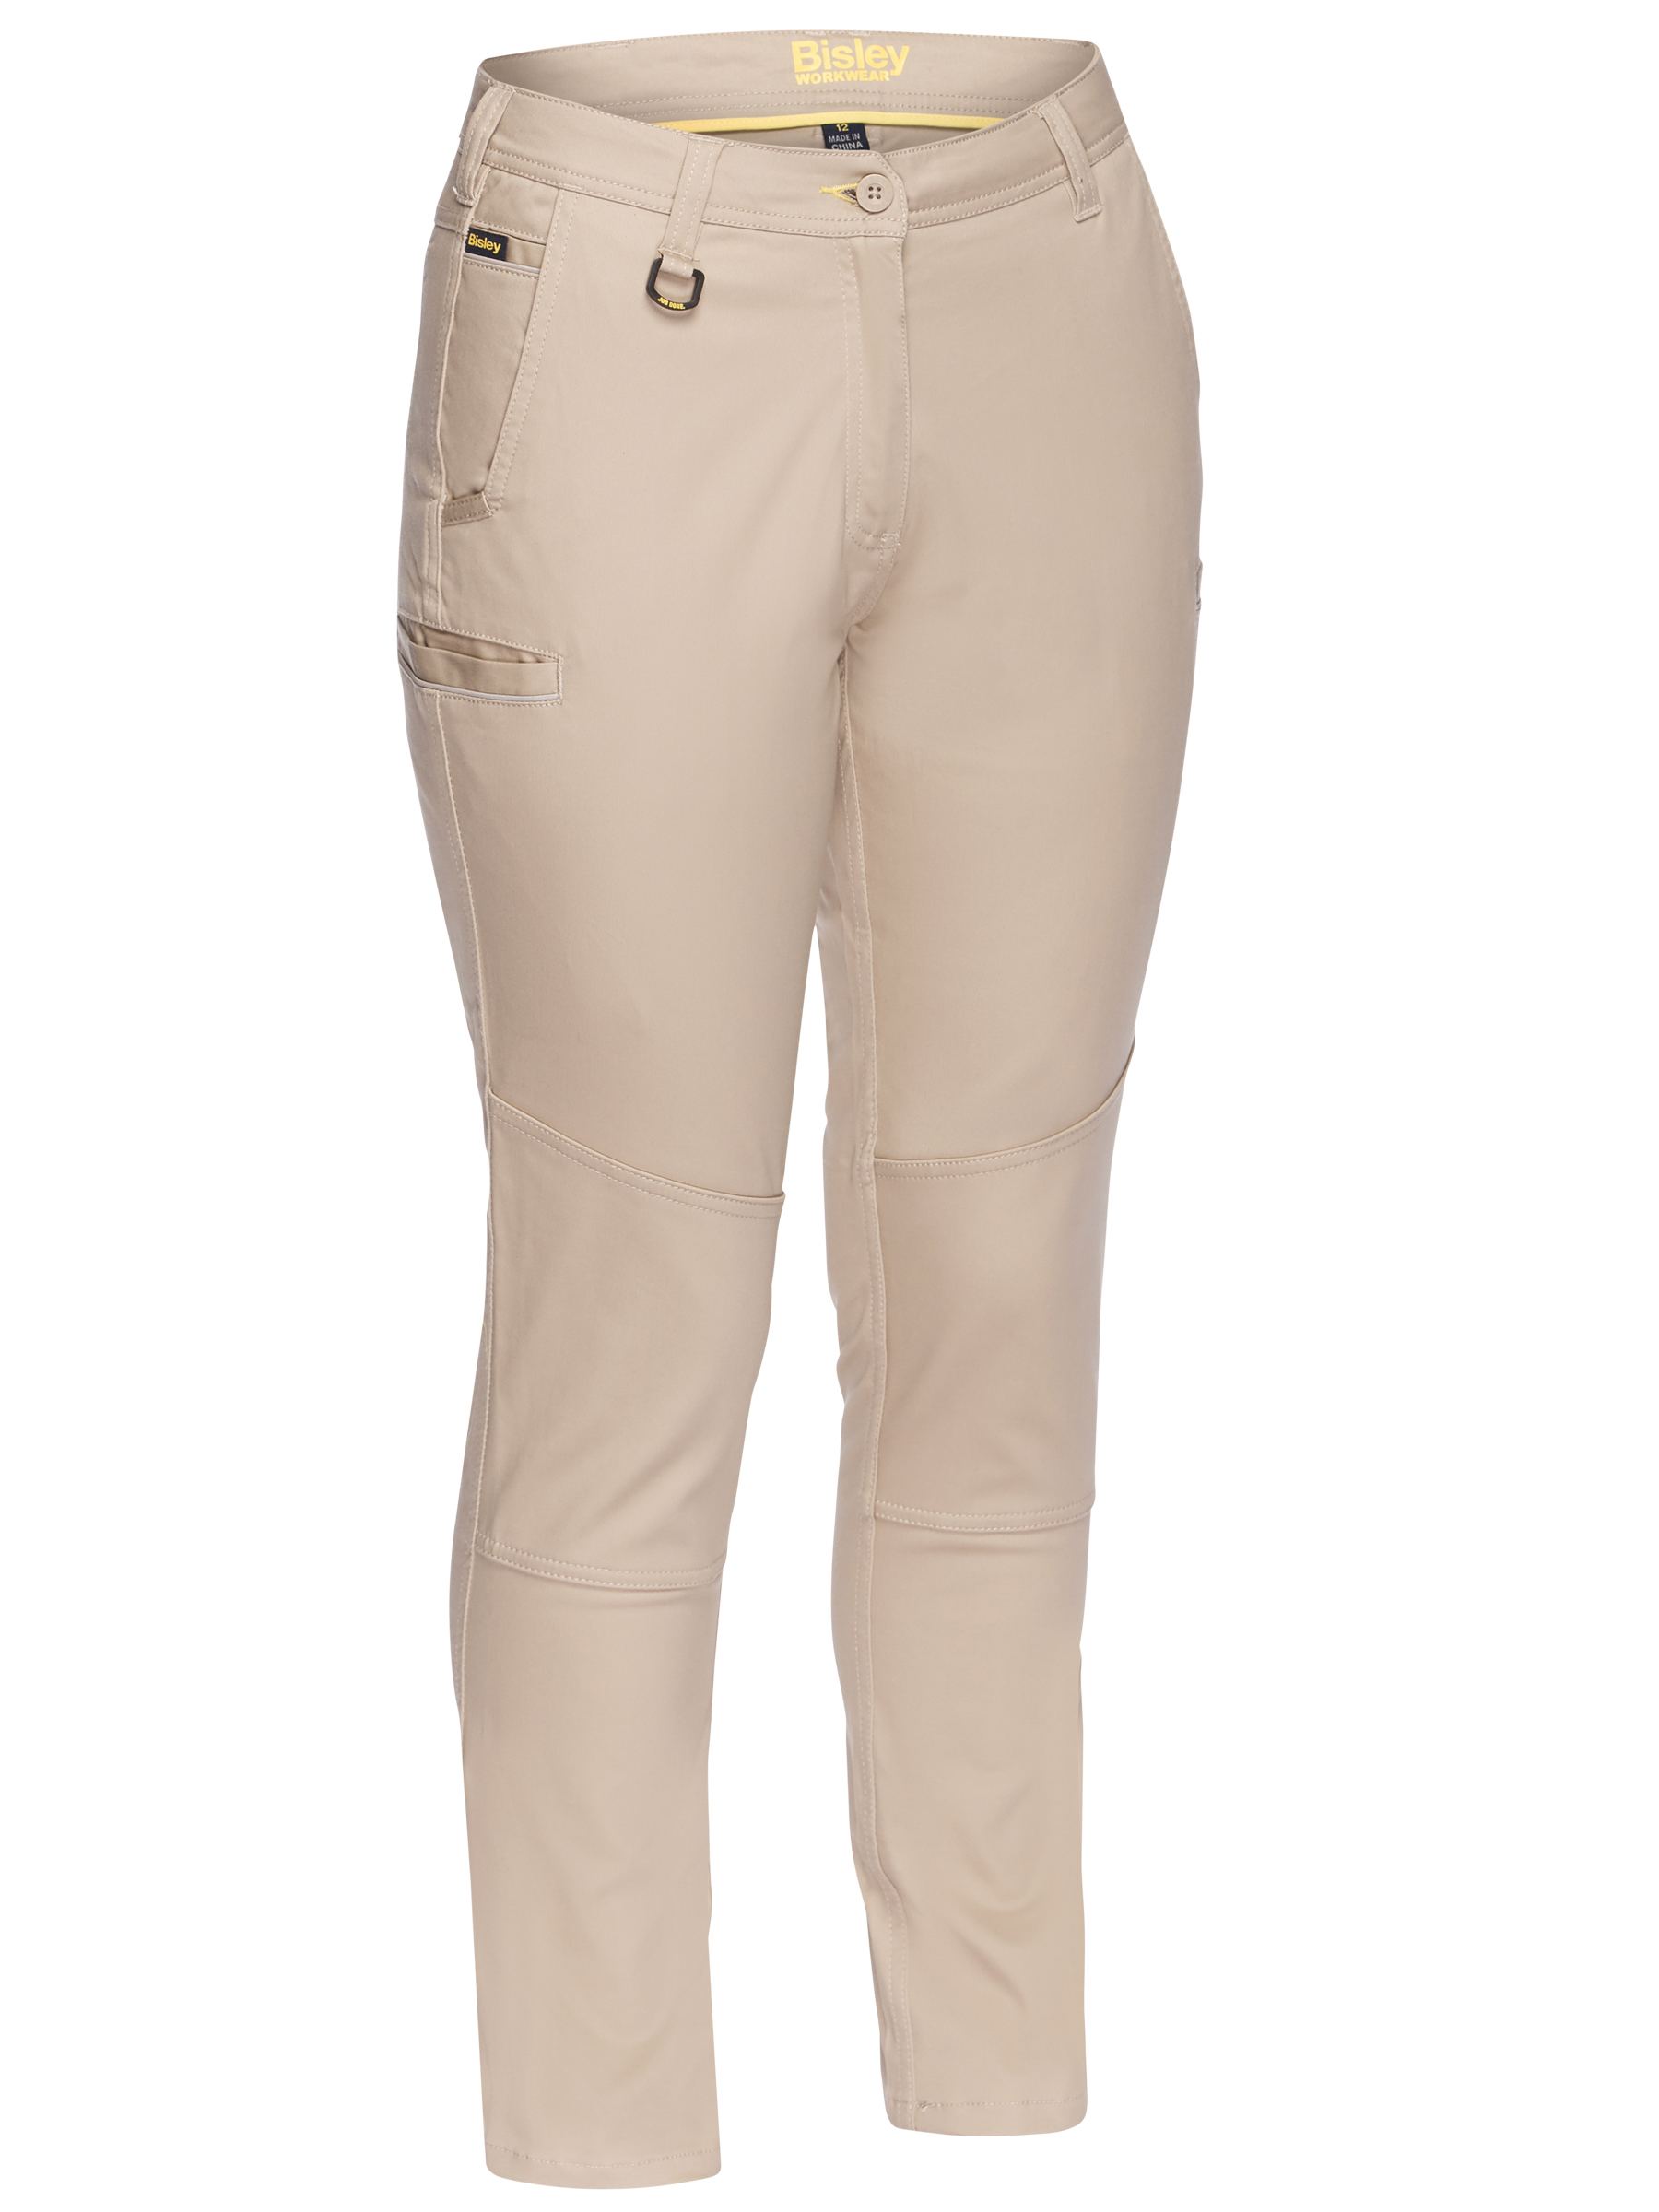 Women's taped mid-rise stovepipe fit stretch cotton pants - BPL6015T -  Bisley Workwear